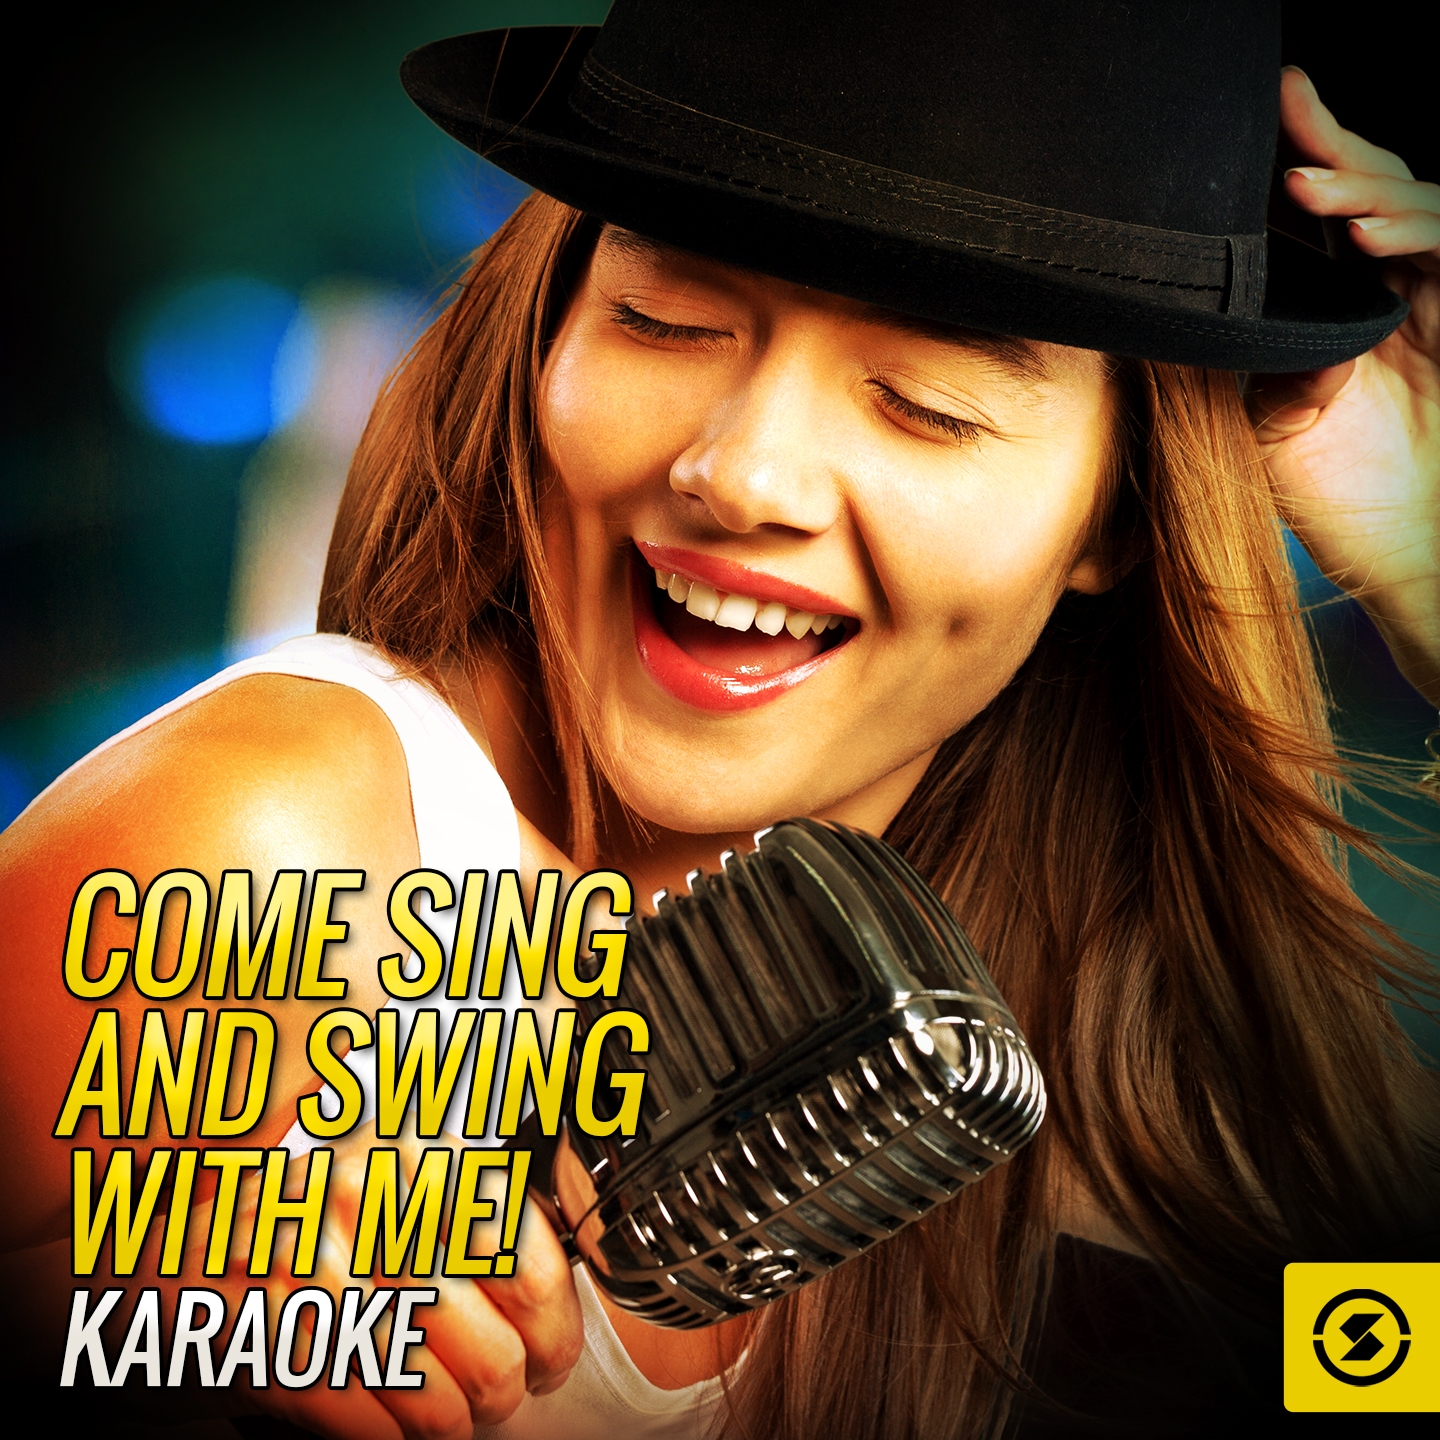 Come Sing and Swing with Me! Karaoke